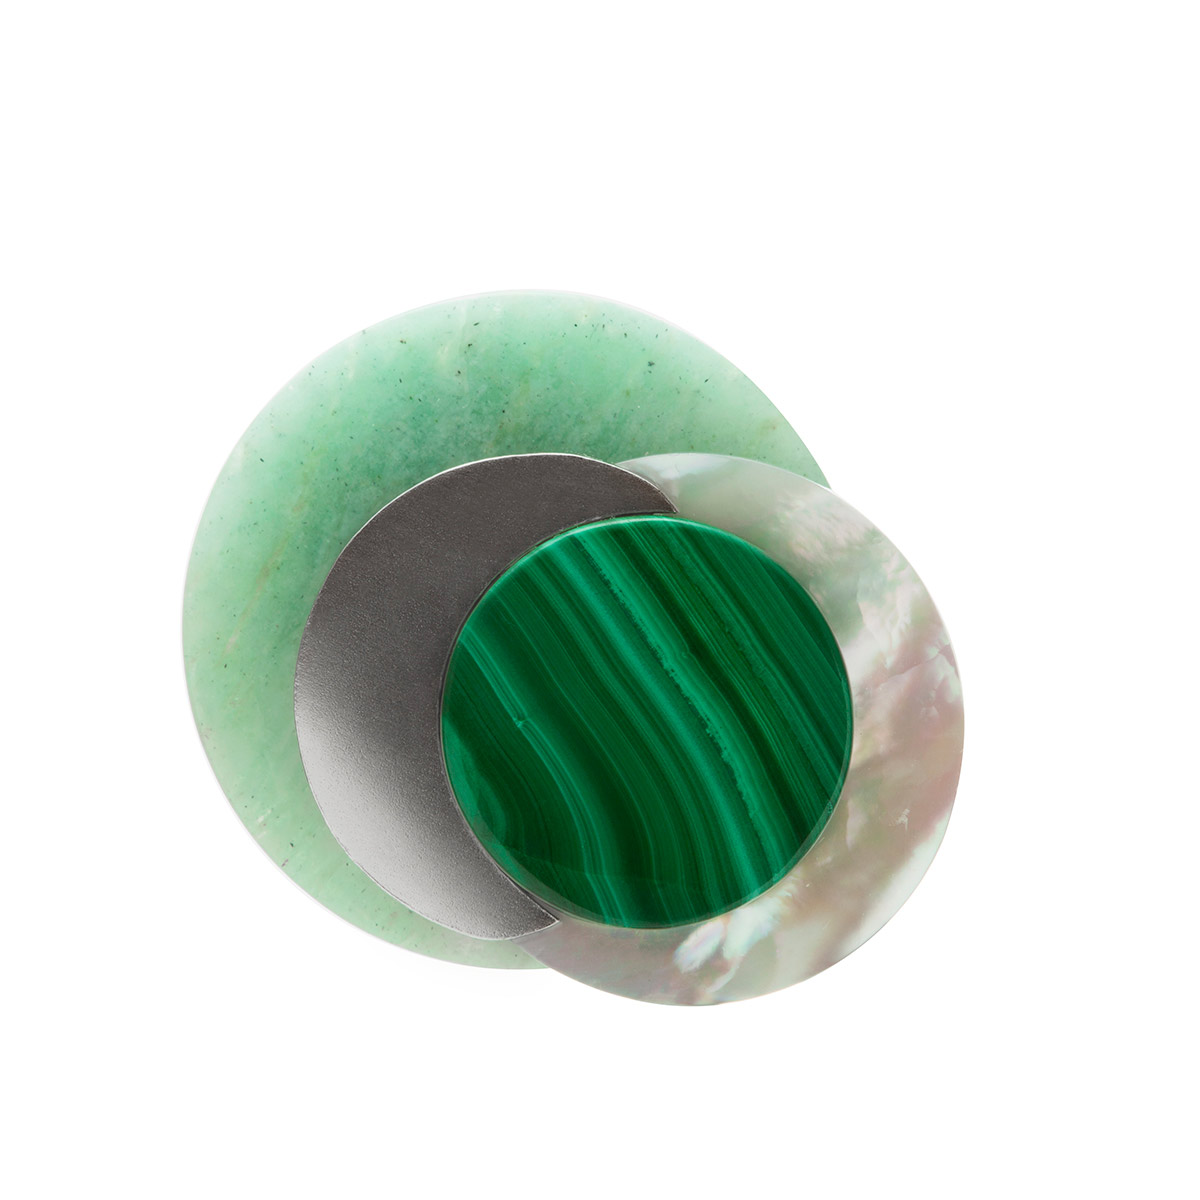 Aka handmade ring in sterling silver, amazonite, mother-of-pearl and malachite 2 designed by Belen Bajo